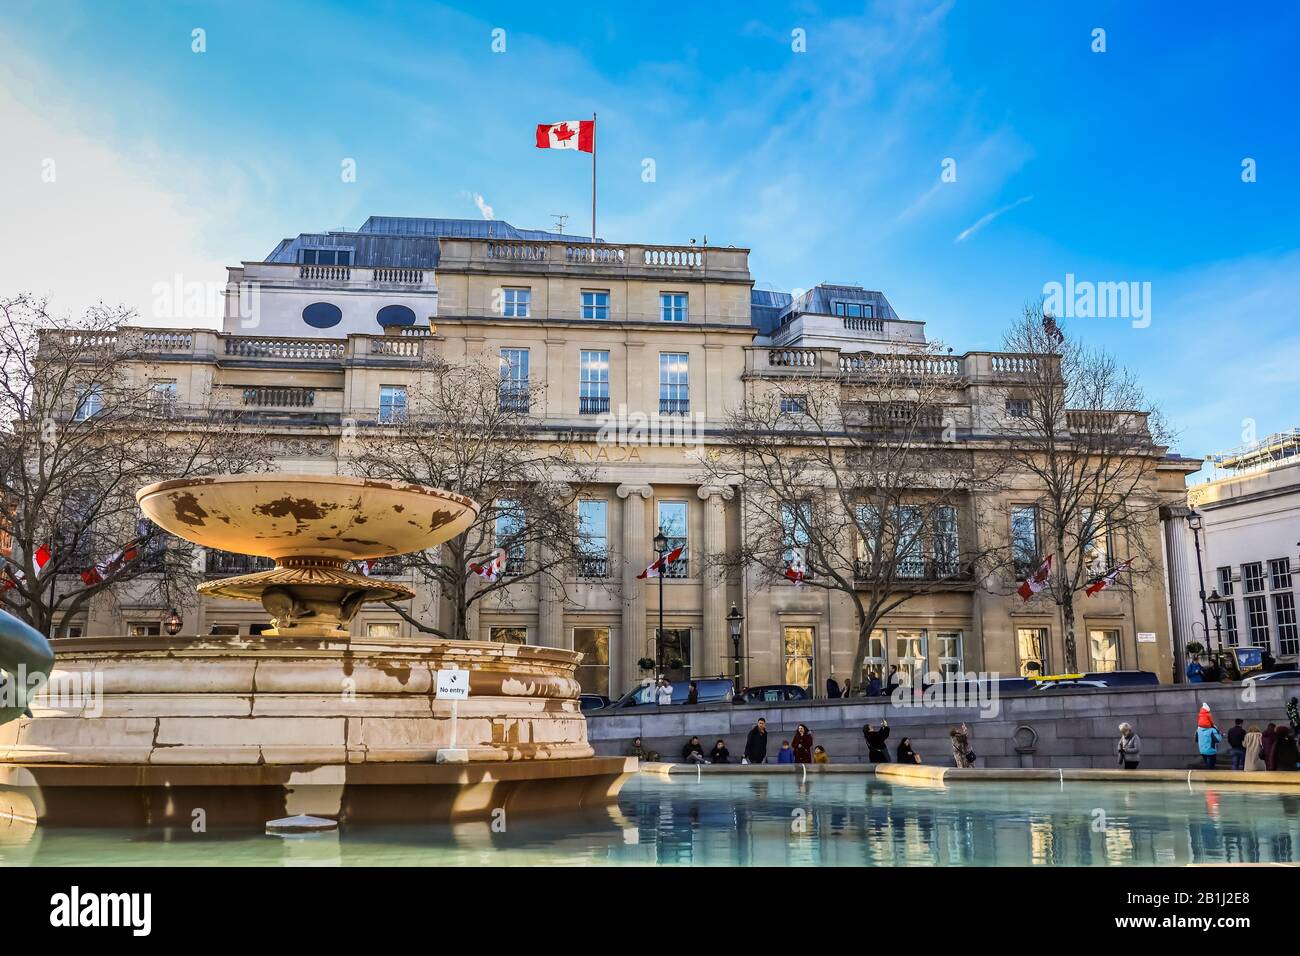 Canadian embassy in London. Located in Trafalgar Square.  Famous fountain and unrecognizable people in the foreground. Stock Photo